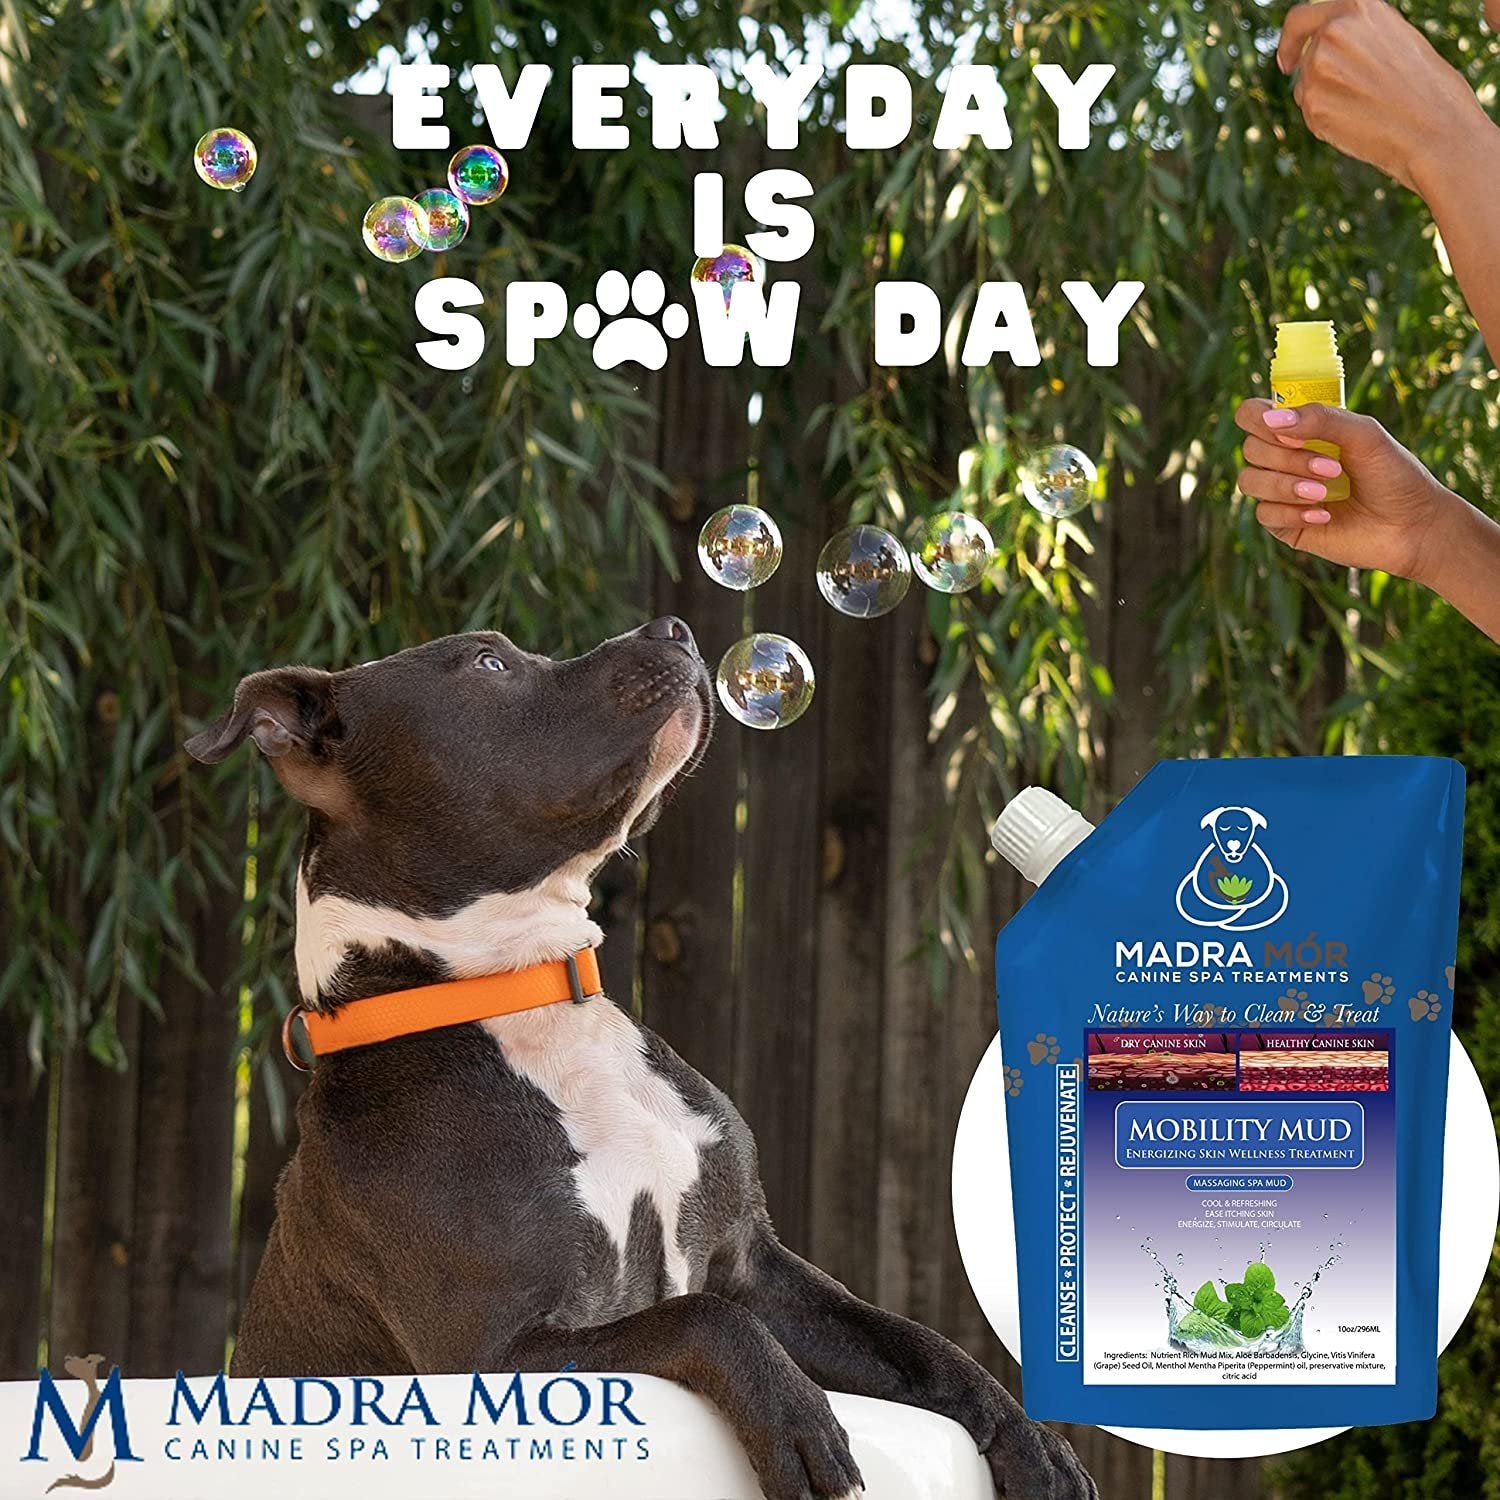 Madra Mor Massaging SPA Mud - Luxurious Dog Skin Wellness Treatment - Cleanse - Protect - Rejuvenate - Mobility Mud - 1 Pack (10oz) - with Multi-Purpose Key Chain